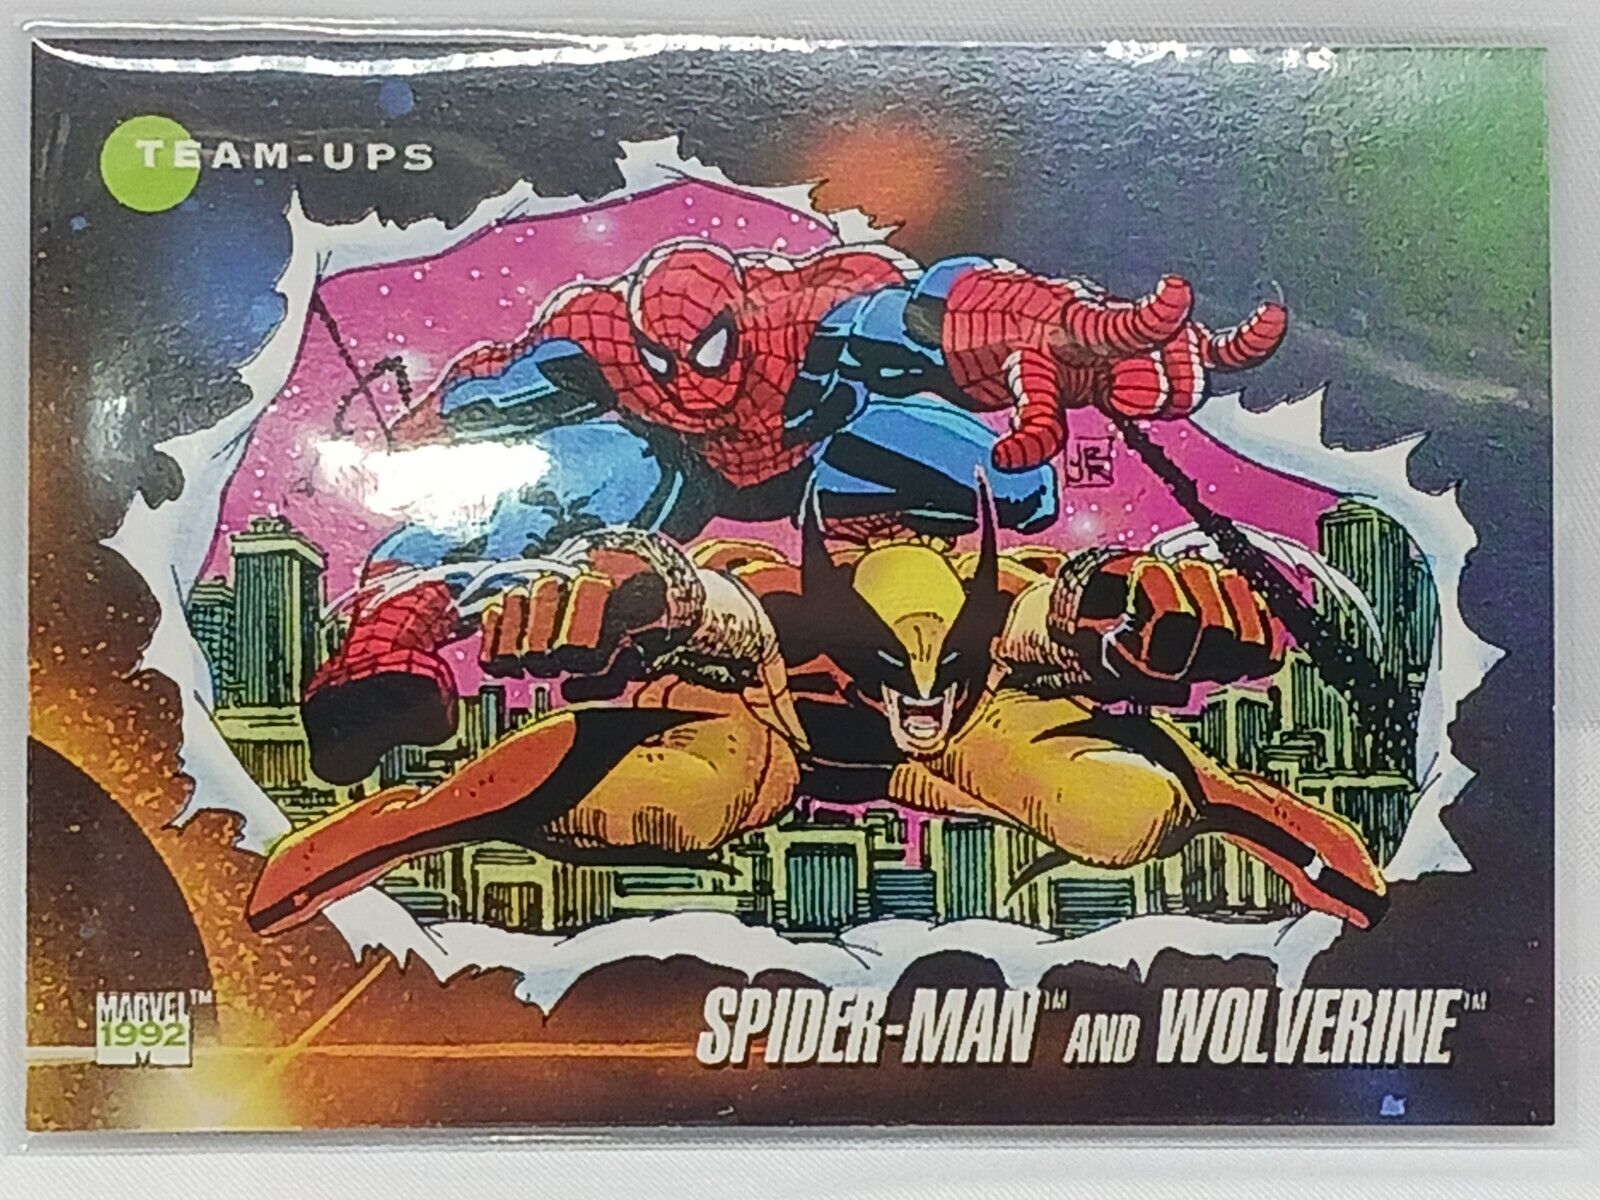 Marvel Impel Series 3 1992 Spider-Man and Wolverine Team-Ups Trading Card 74